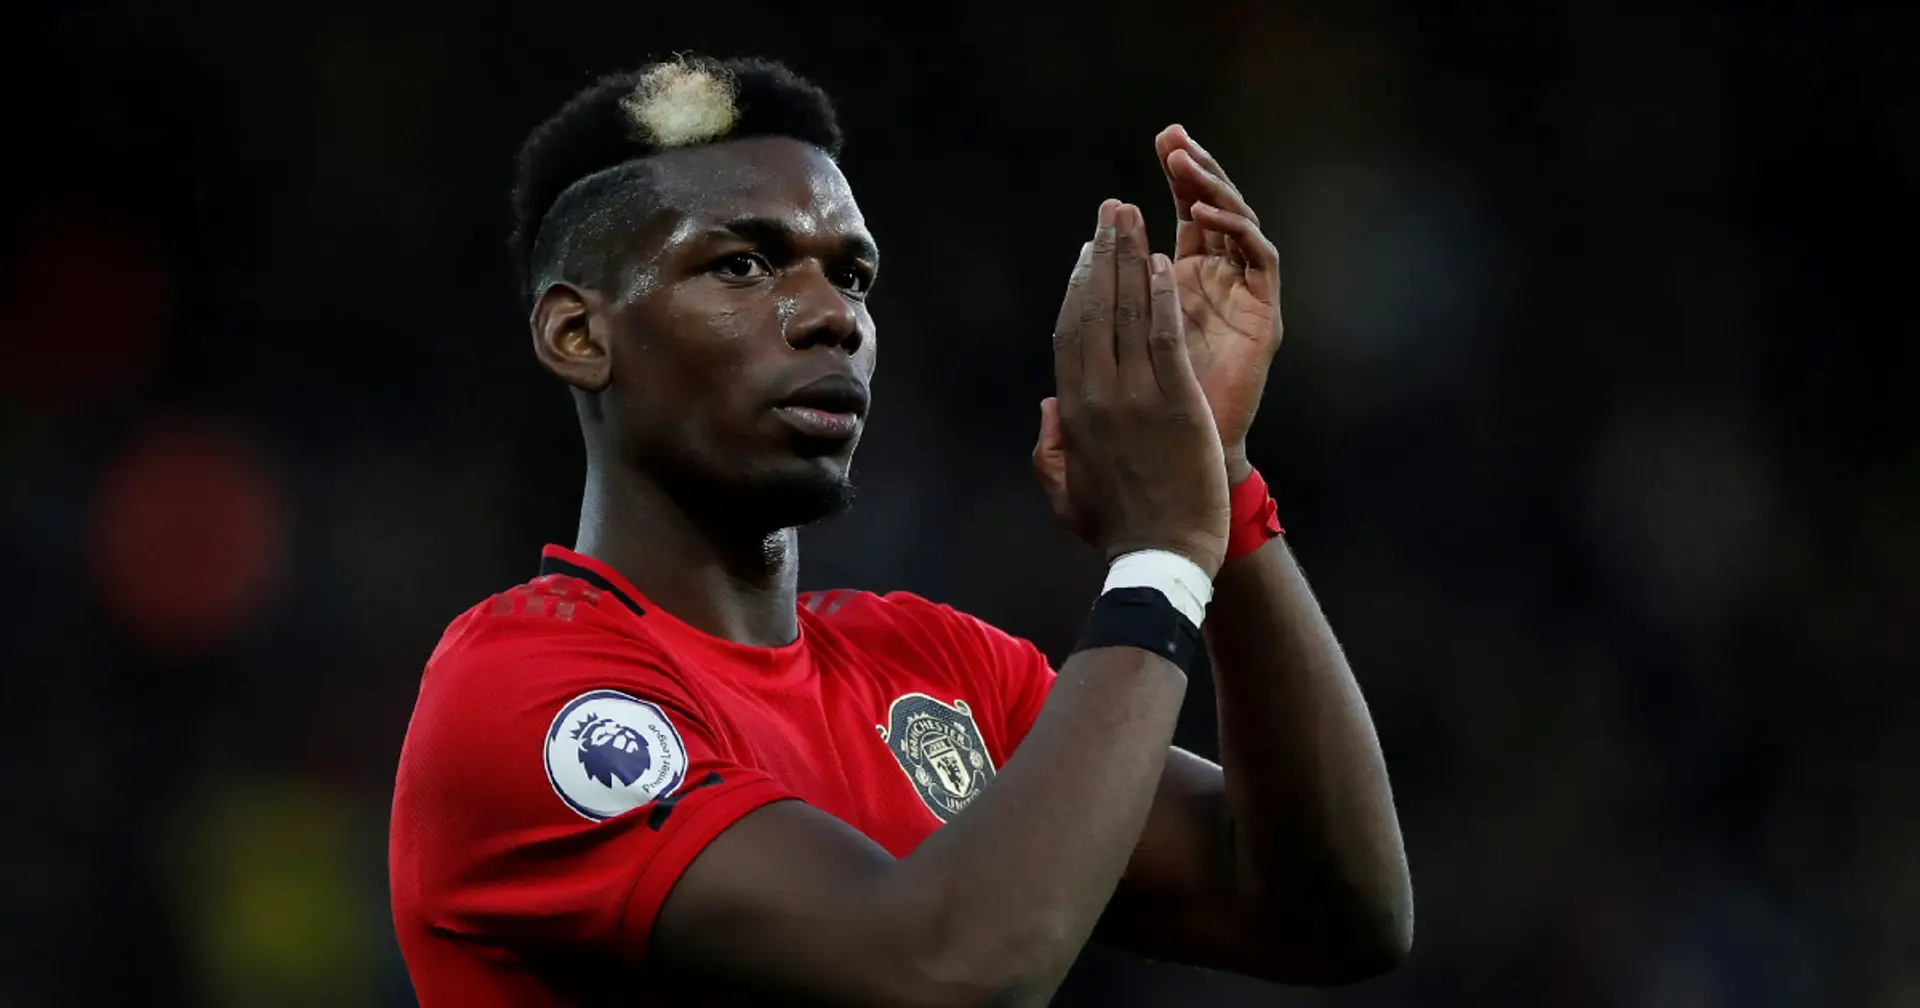 The Pogba experiment has failed and we need to move on - Here's why